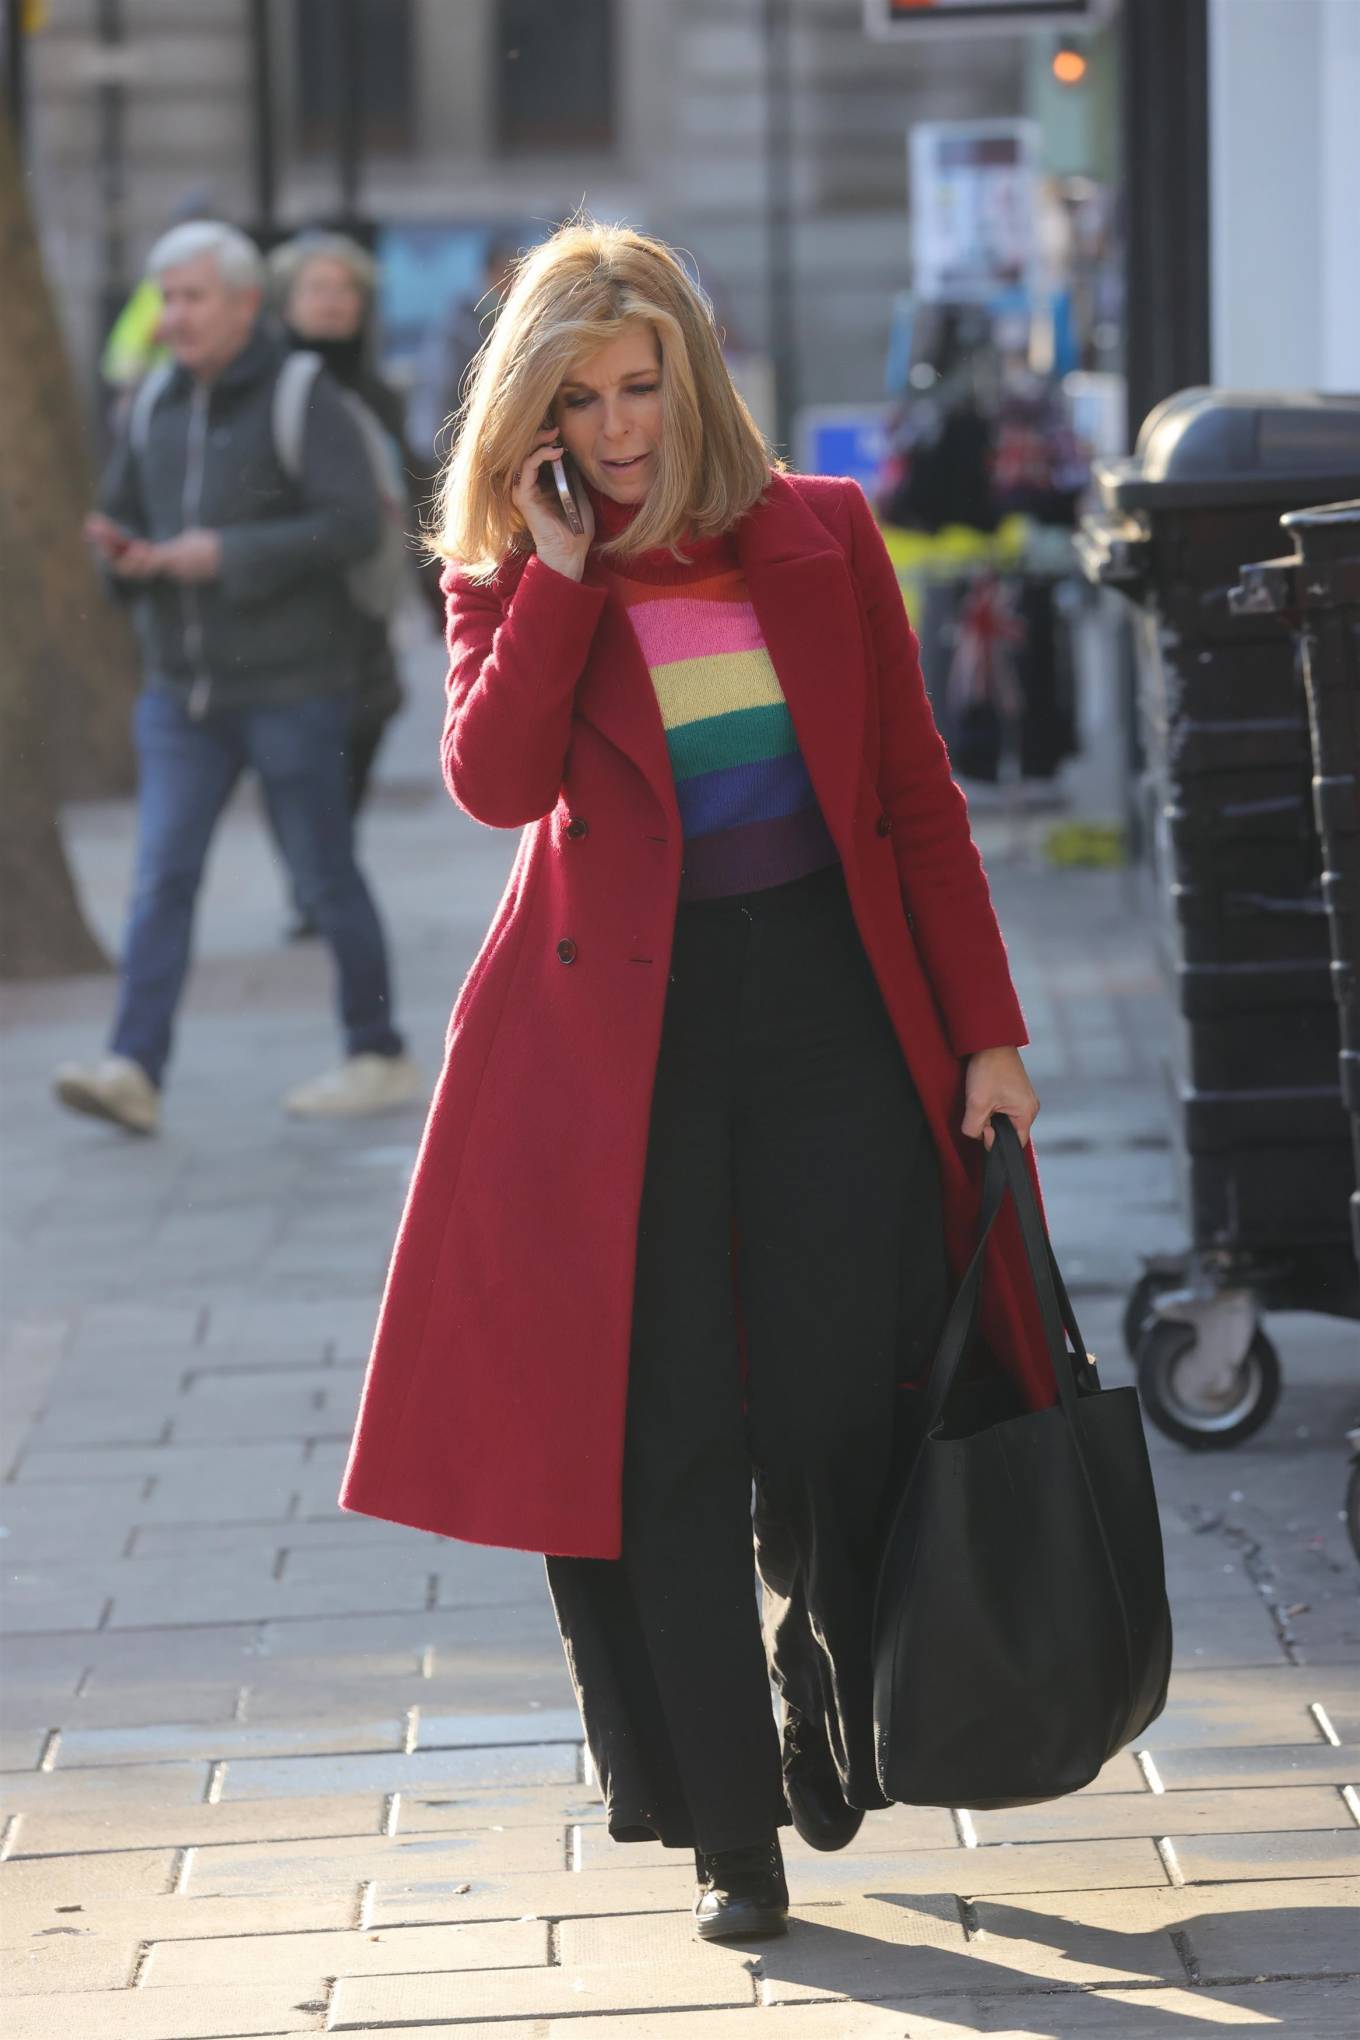 Kate Garraway 2022 : Kate Garraway – Out in a rainbow top and red coat earring at Global offices in London-03